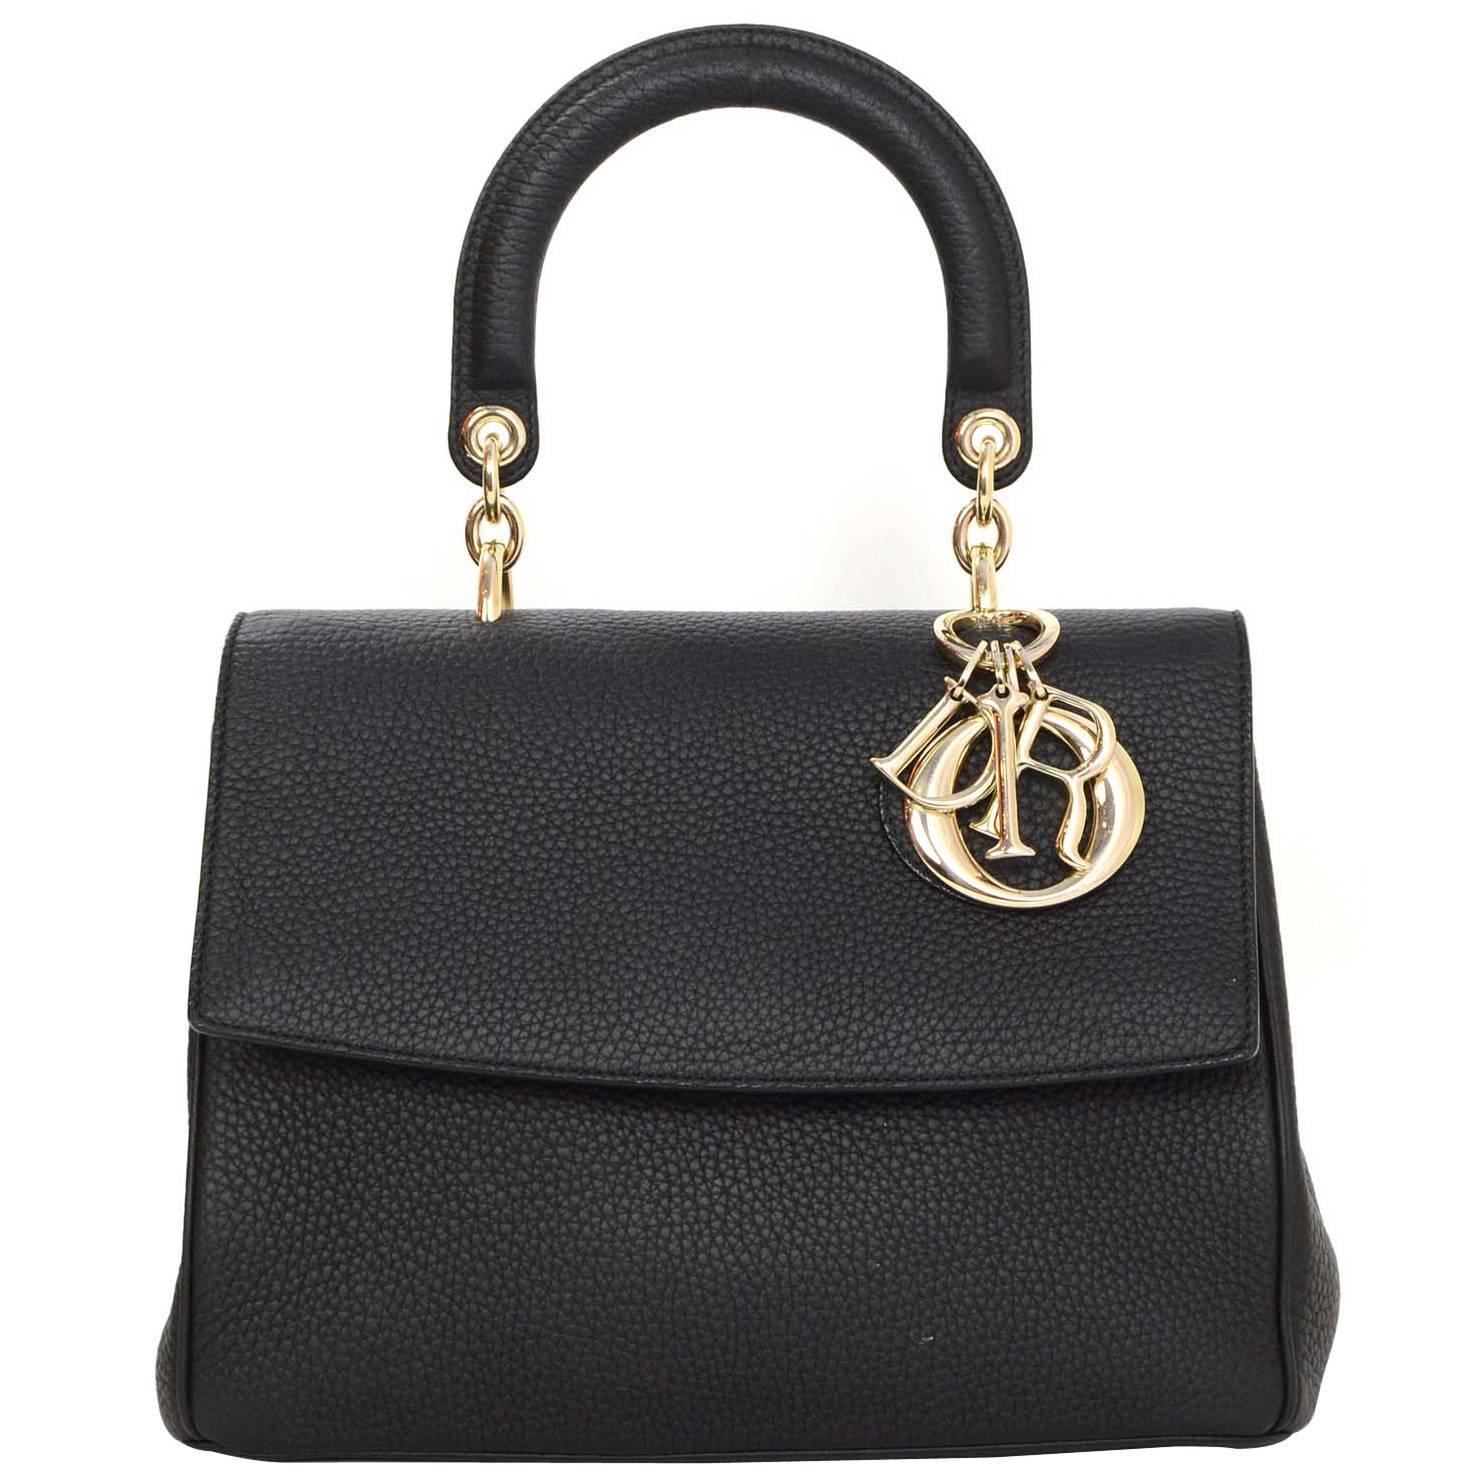 Christian Dior Black Leather Small Be Dior Bag GHW rt. $4,400 For Sale